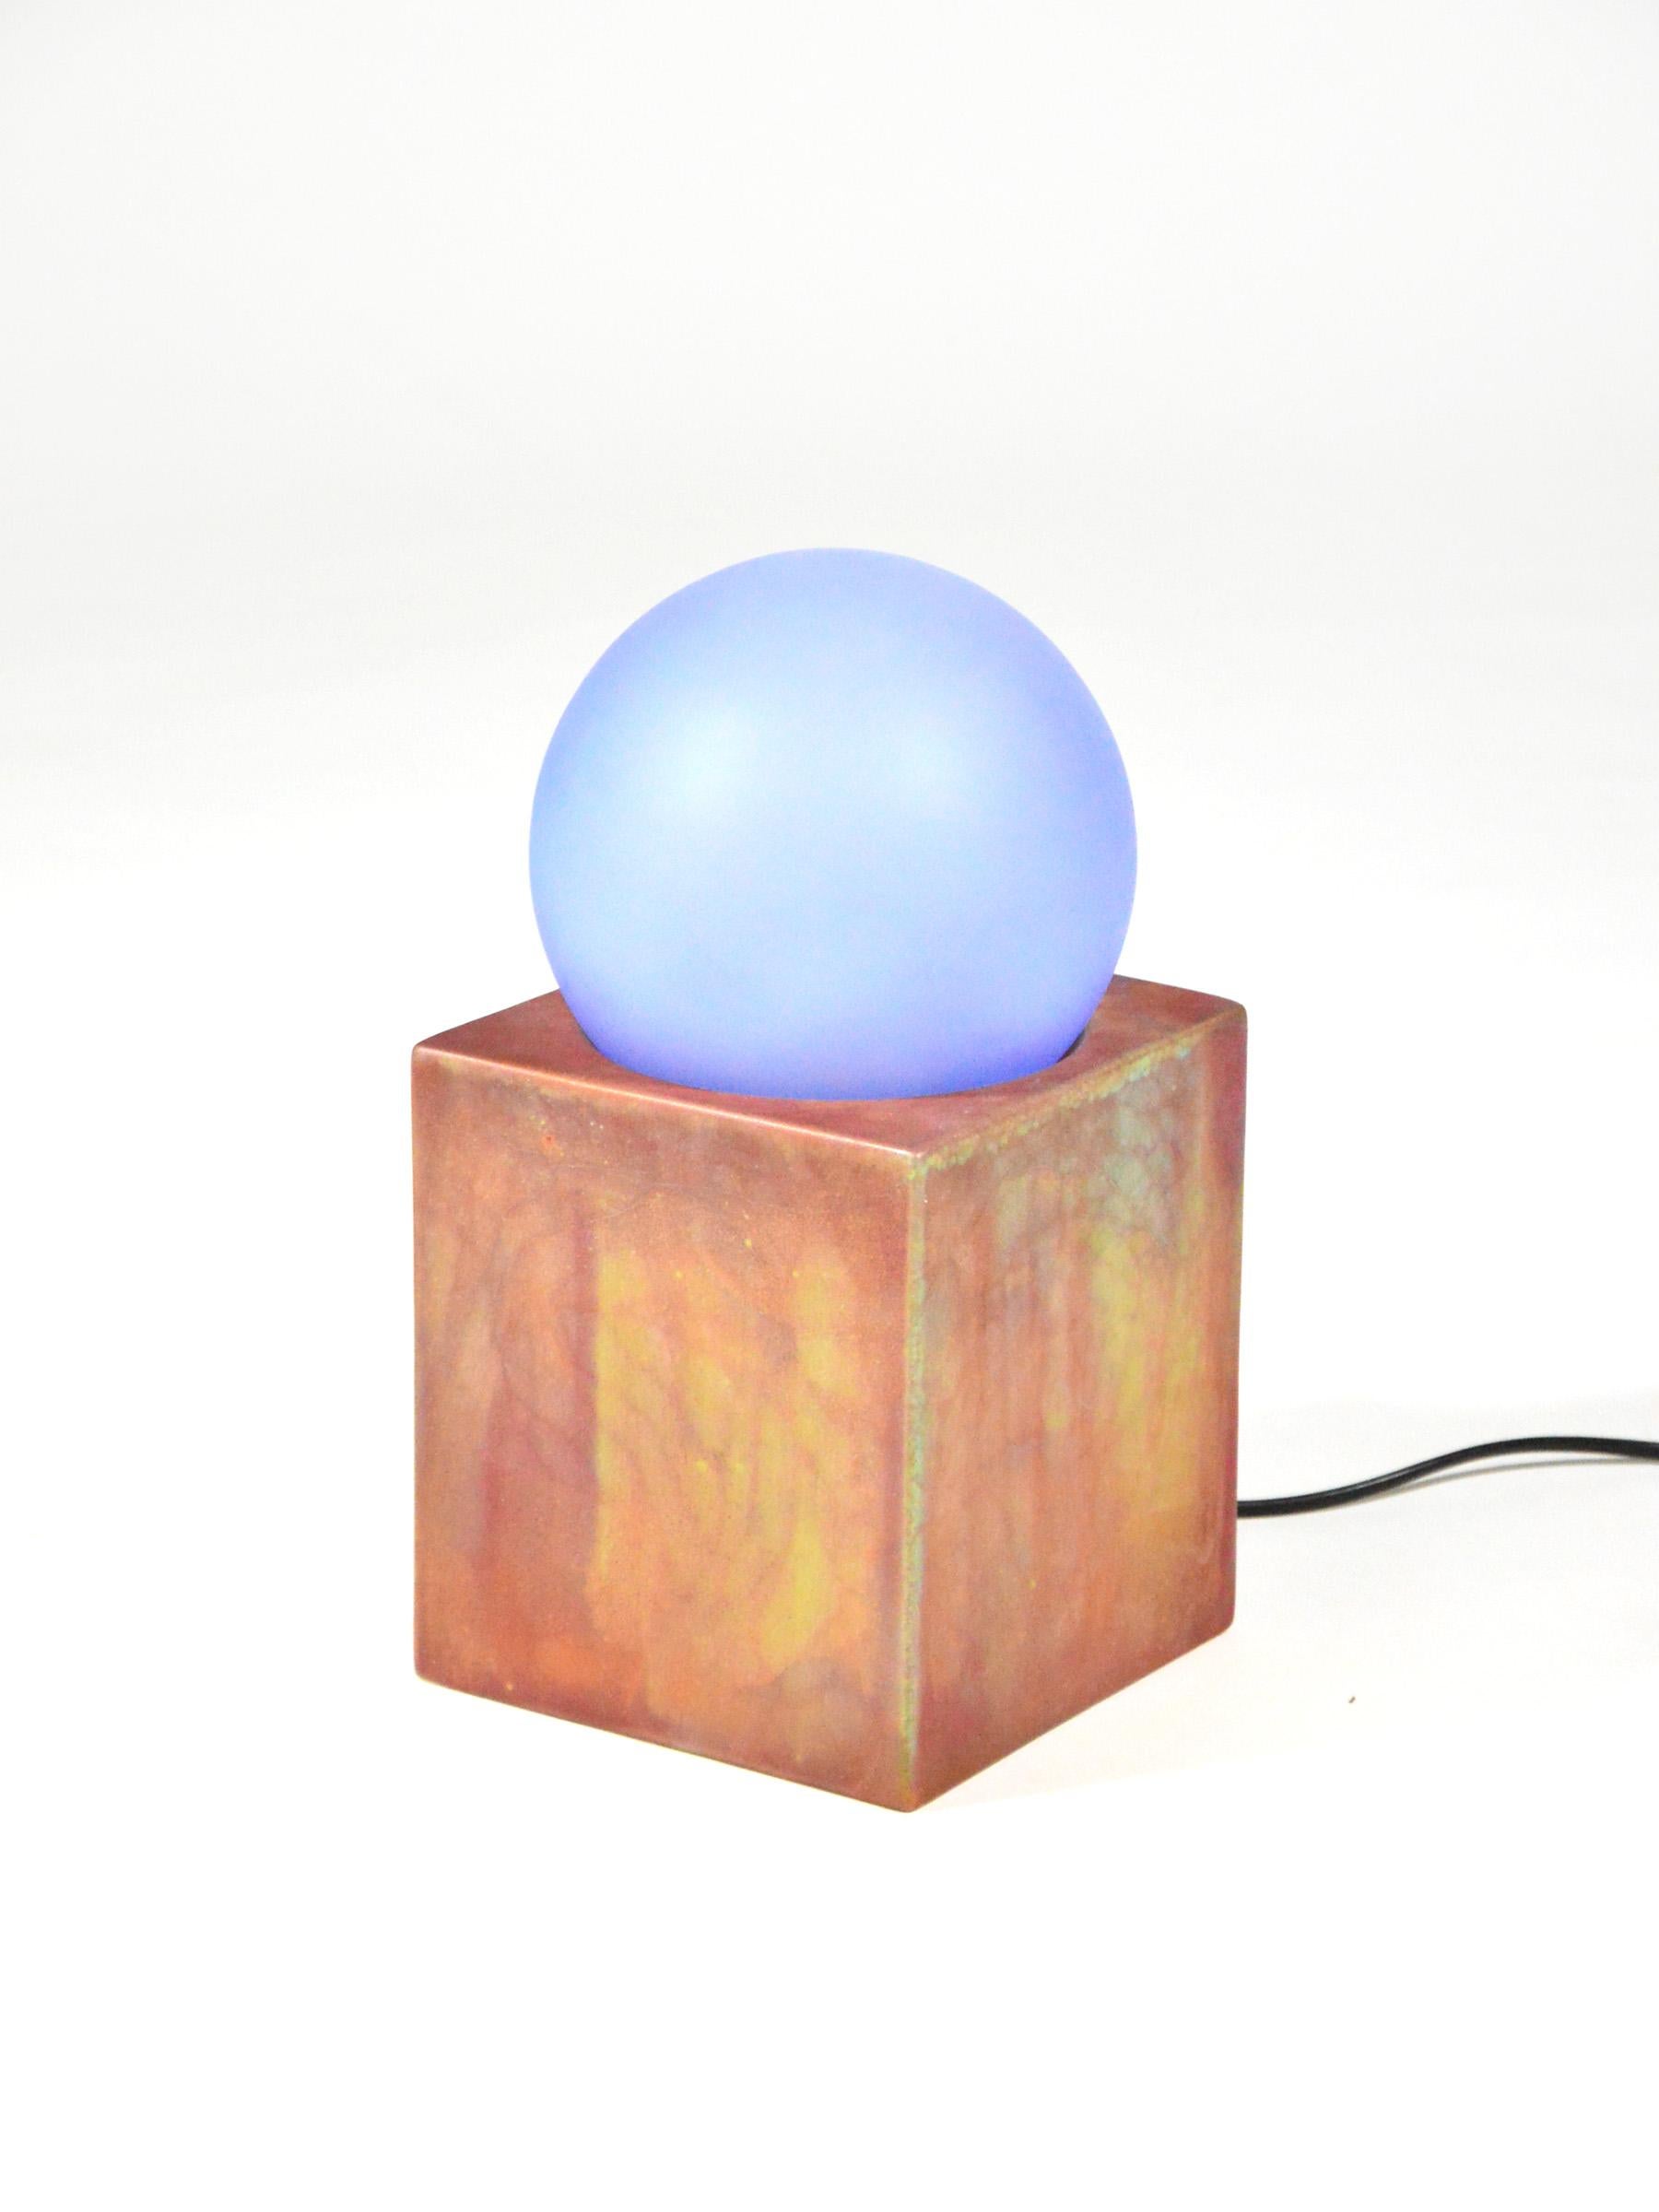 The 'Alba' lamp was designed by Ettore Sottsass for the electricity company Enel, this is a version made in only 100 signed and numbered pieces.
In contrast to the current production lamp, which has a glass base, this version has a ceramic base